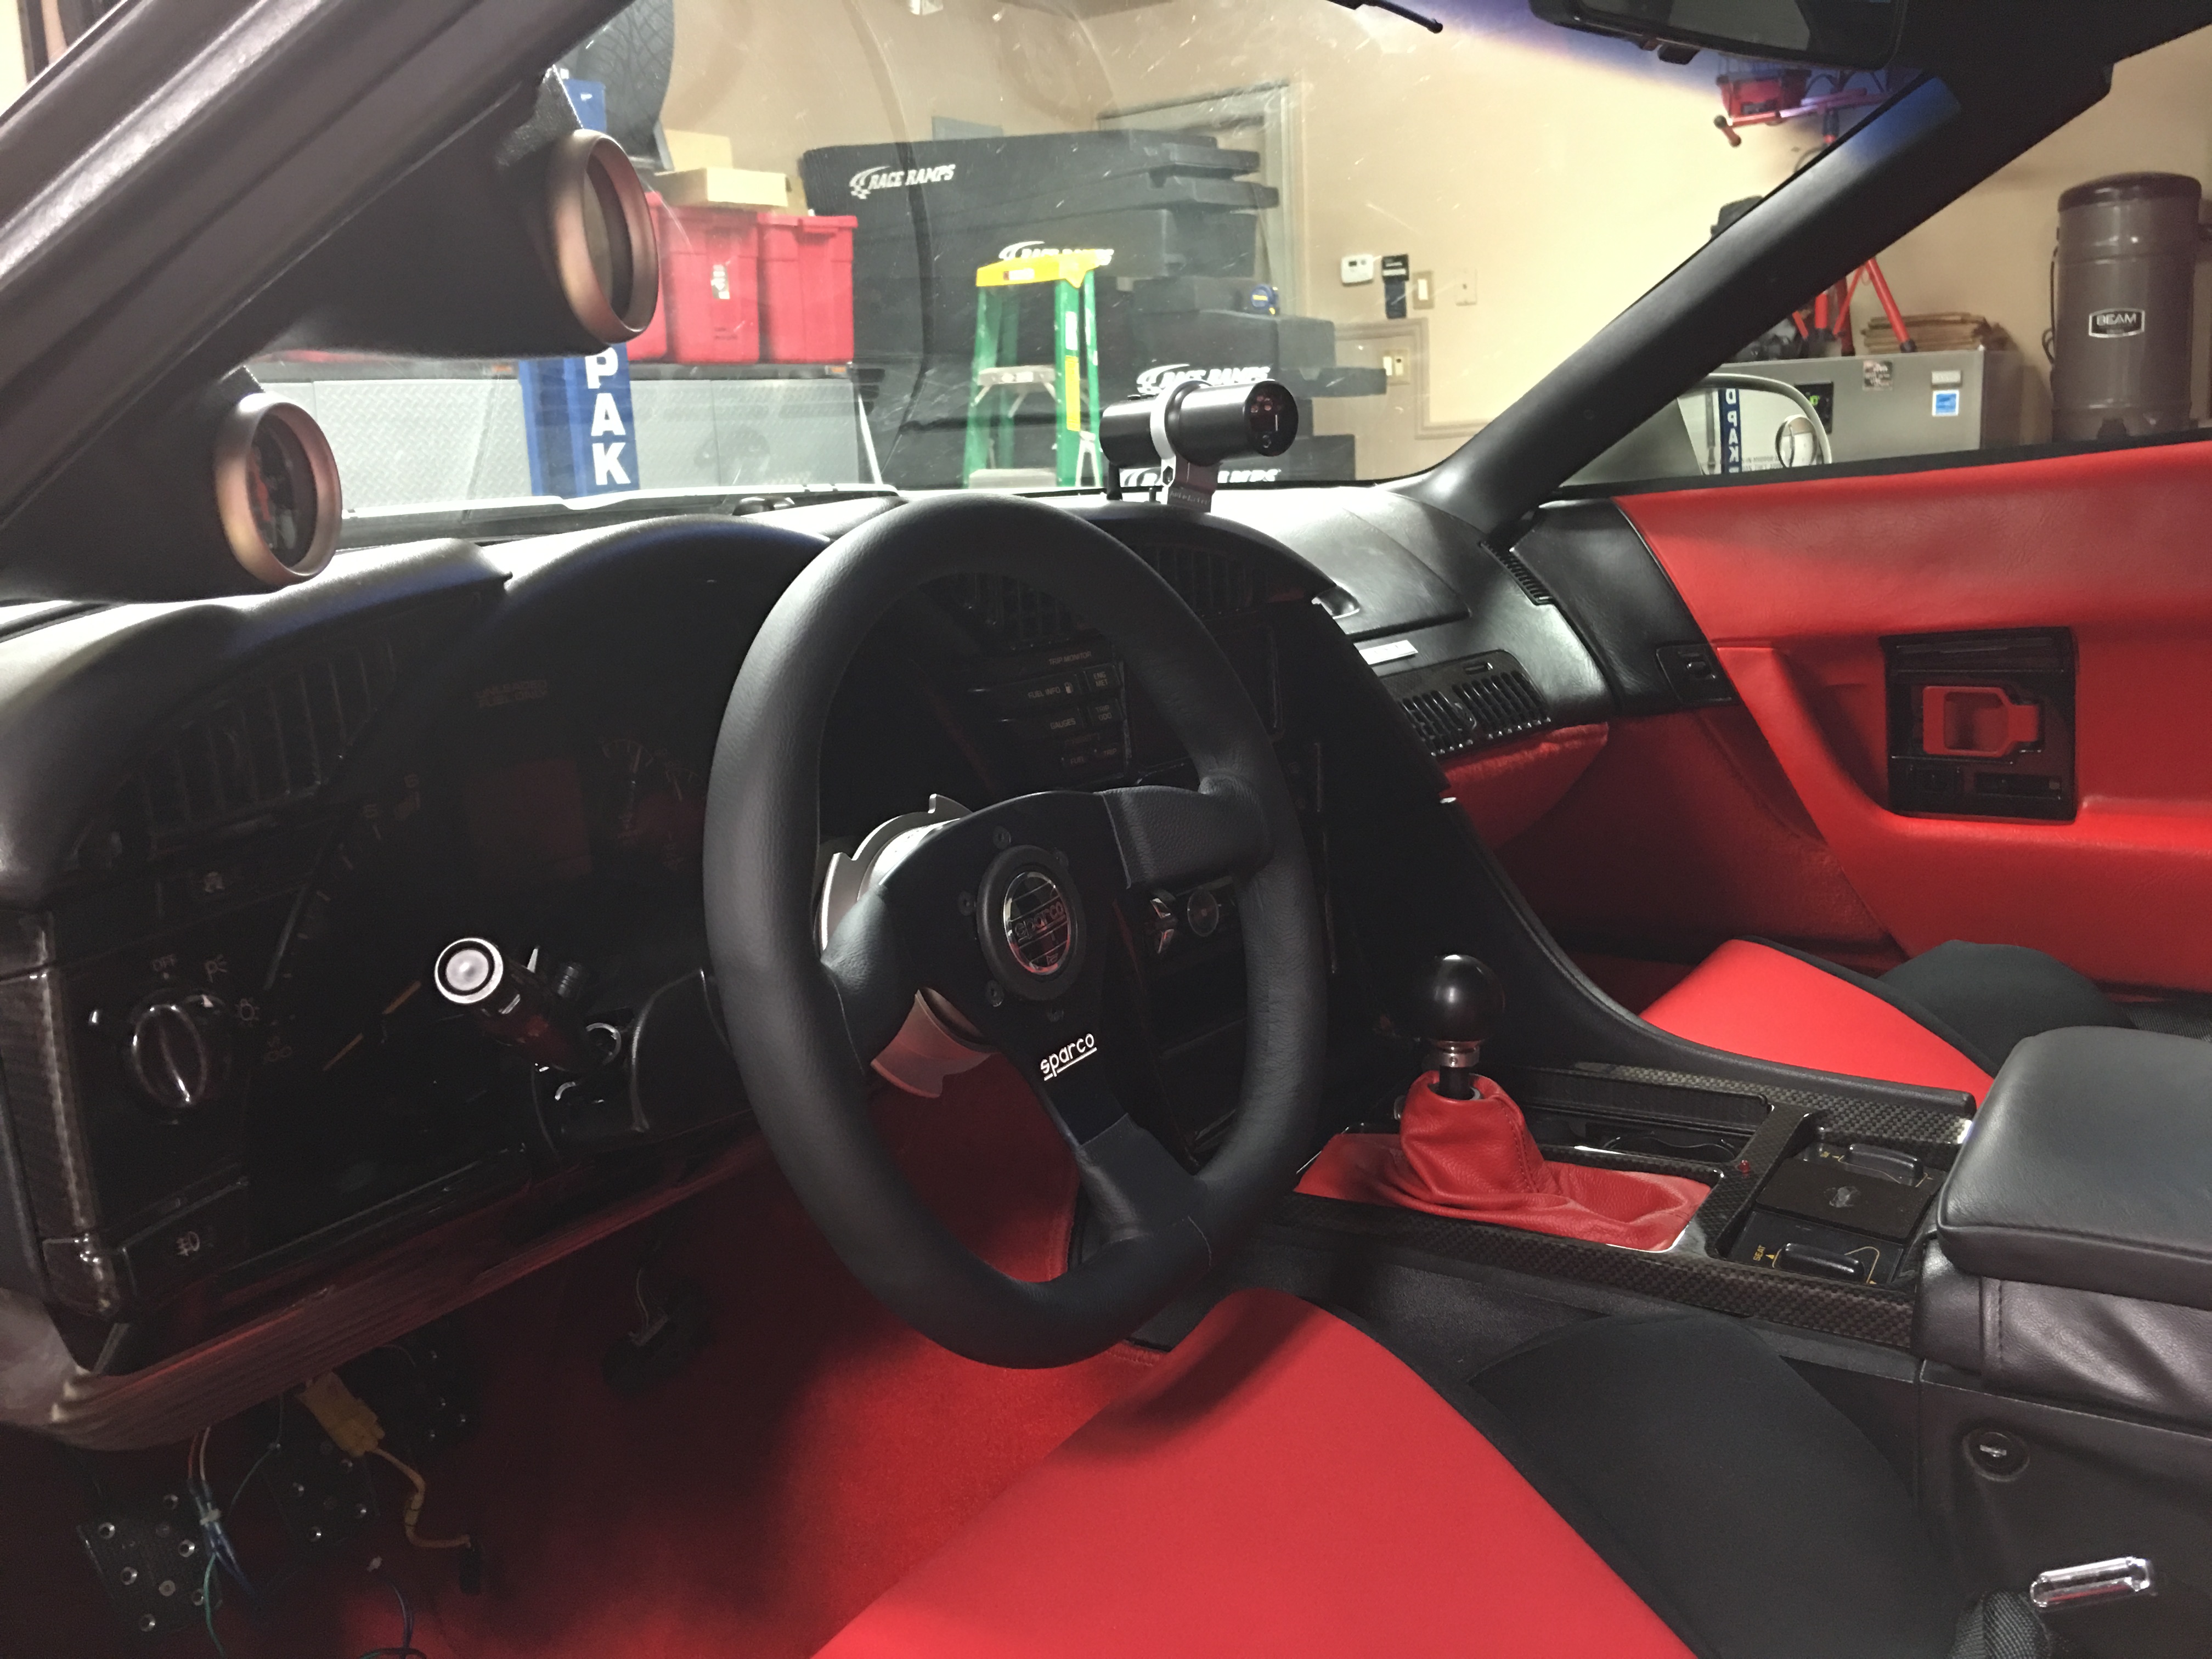 Aftermarket Steering Wheel And Quick Release Install 96 Page 4 Corvetteforum Chevrolet Corvette Forum Discussion